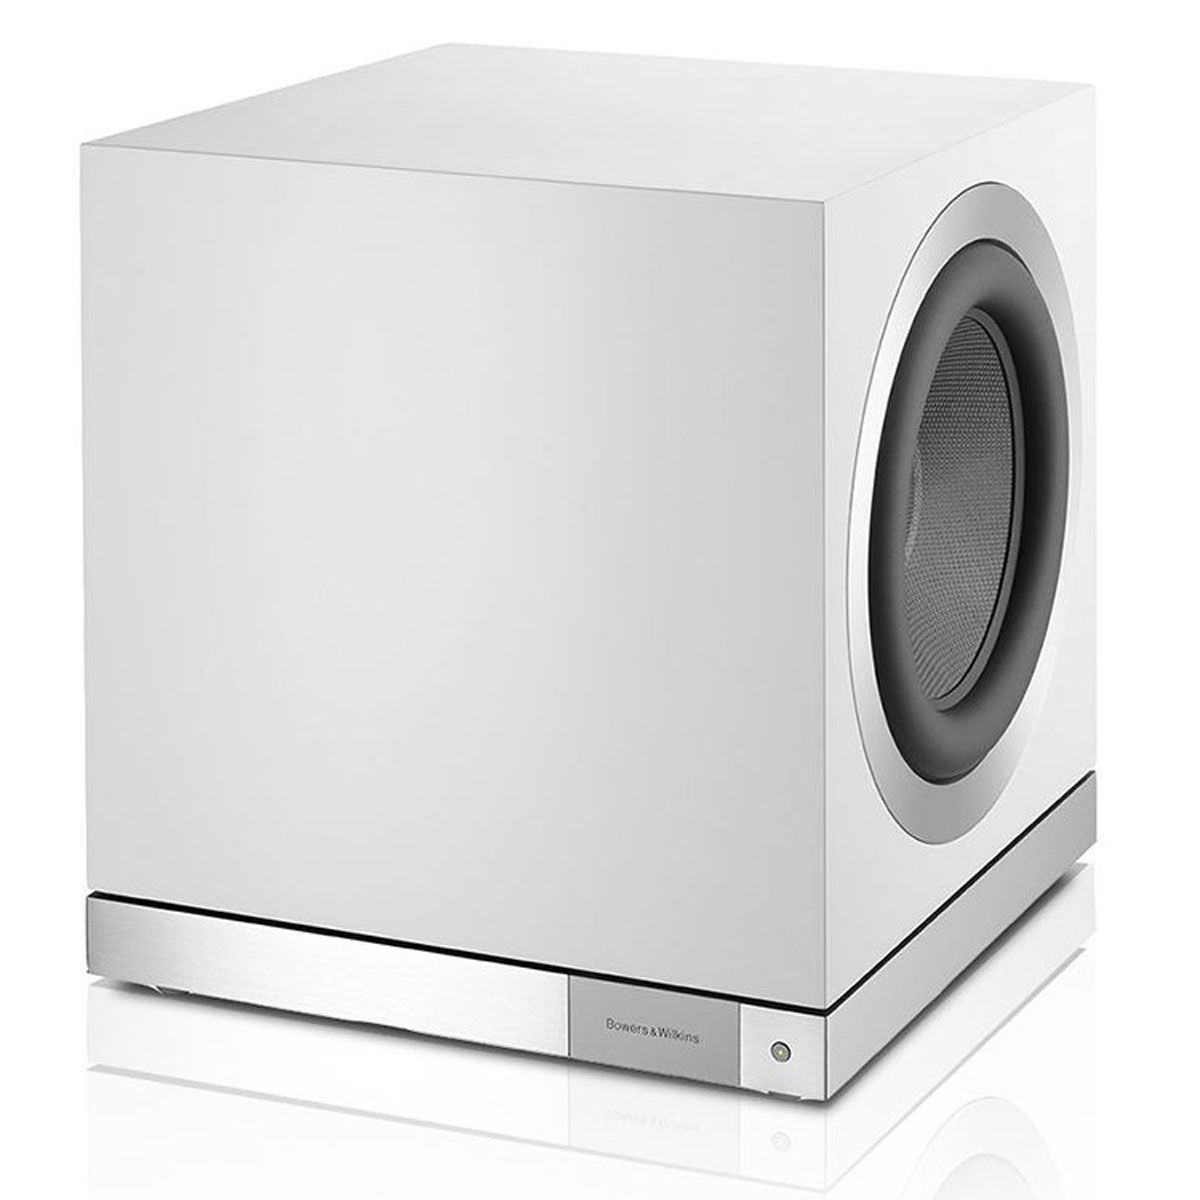 Bowers & Wilkins DB1D Subwoofer - White - Side angle no grille